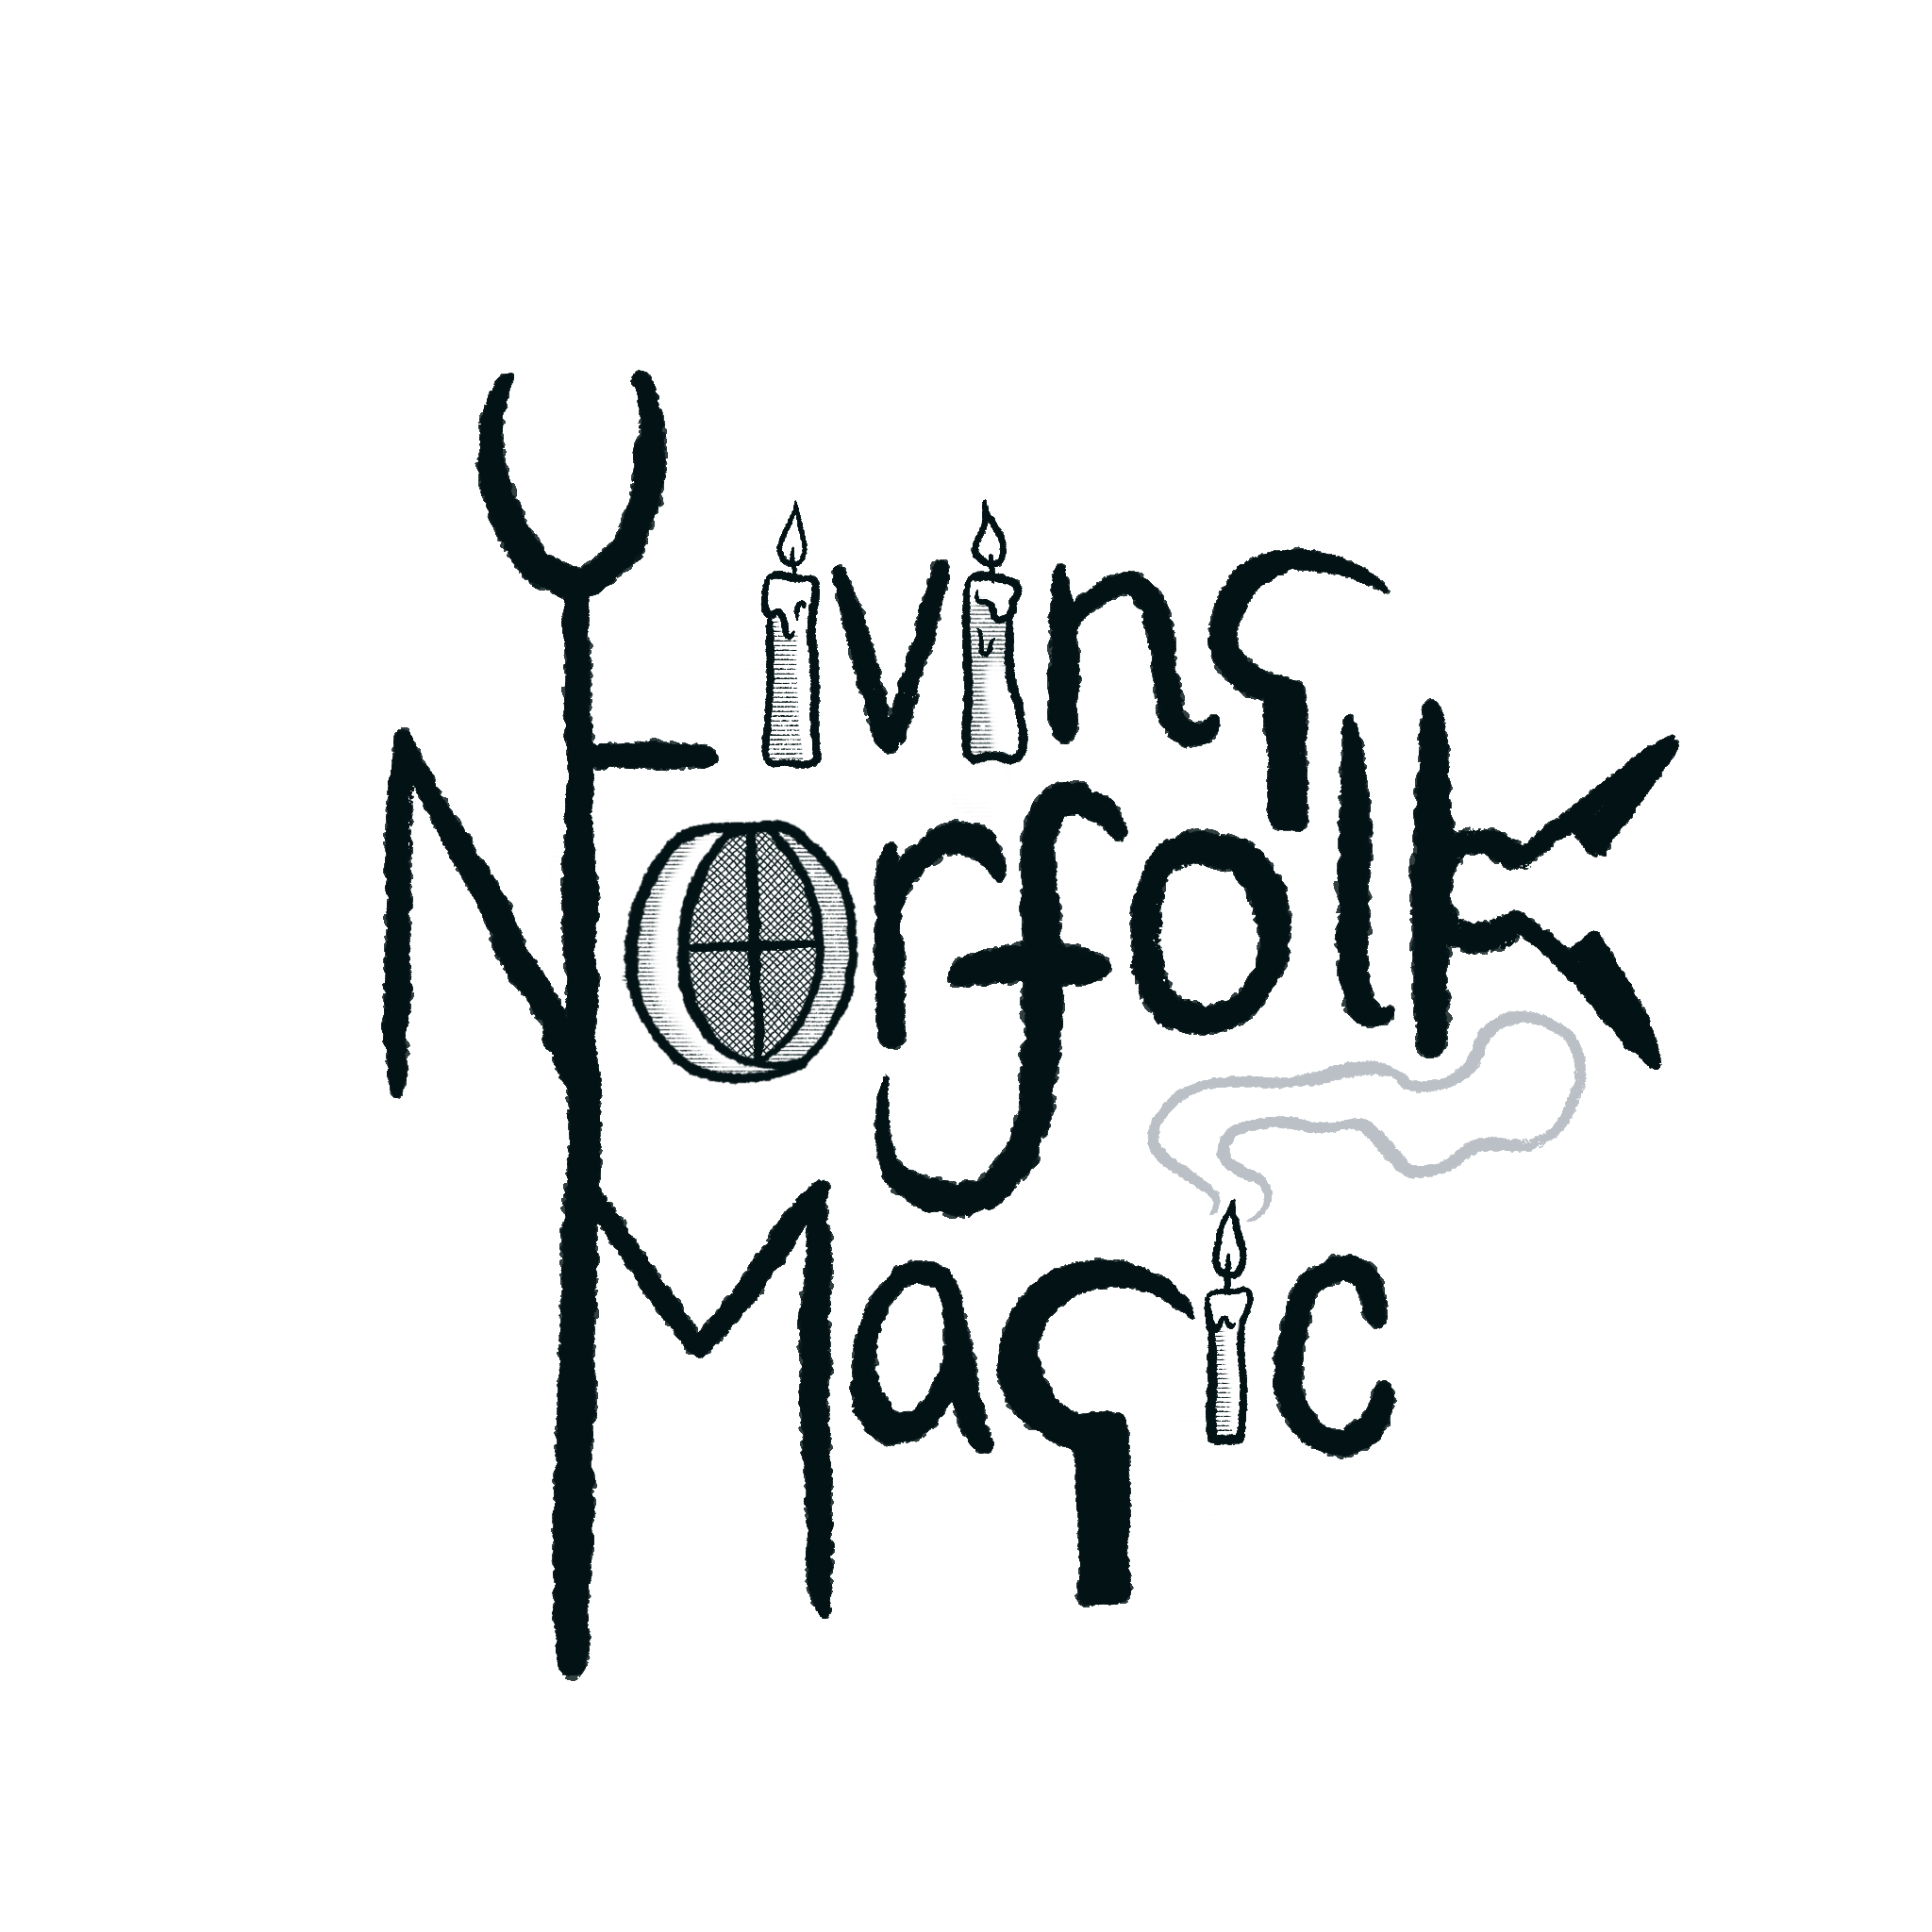 The logo for the Living Norfolk Magic Project, with agricultural tools, forming a link to its Instagram page.